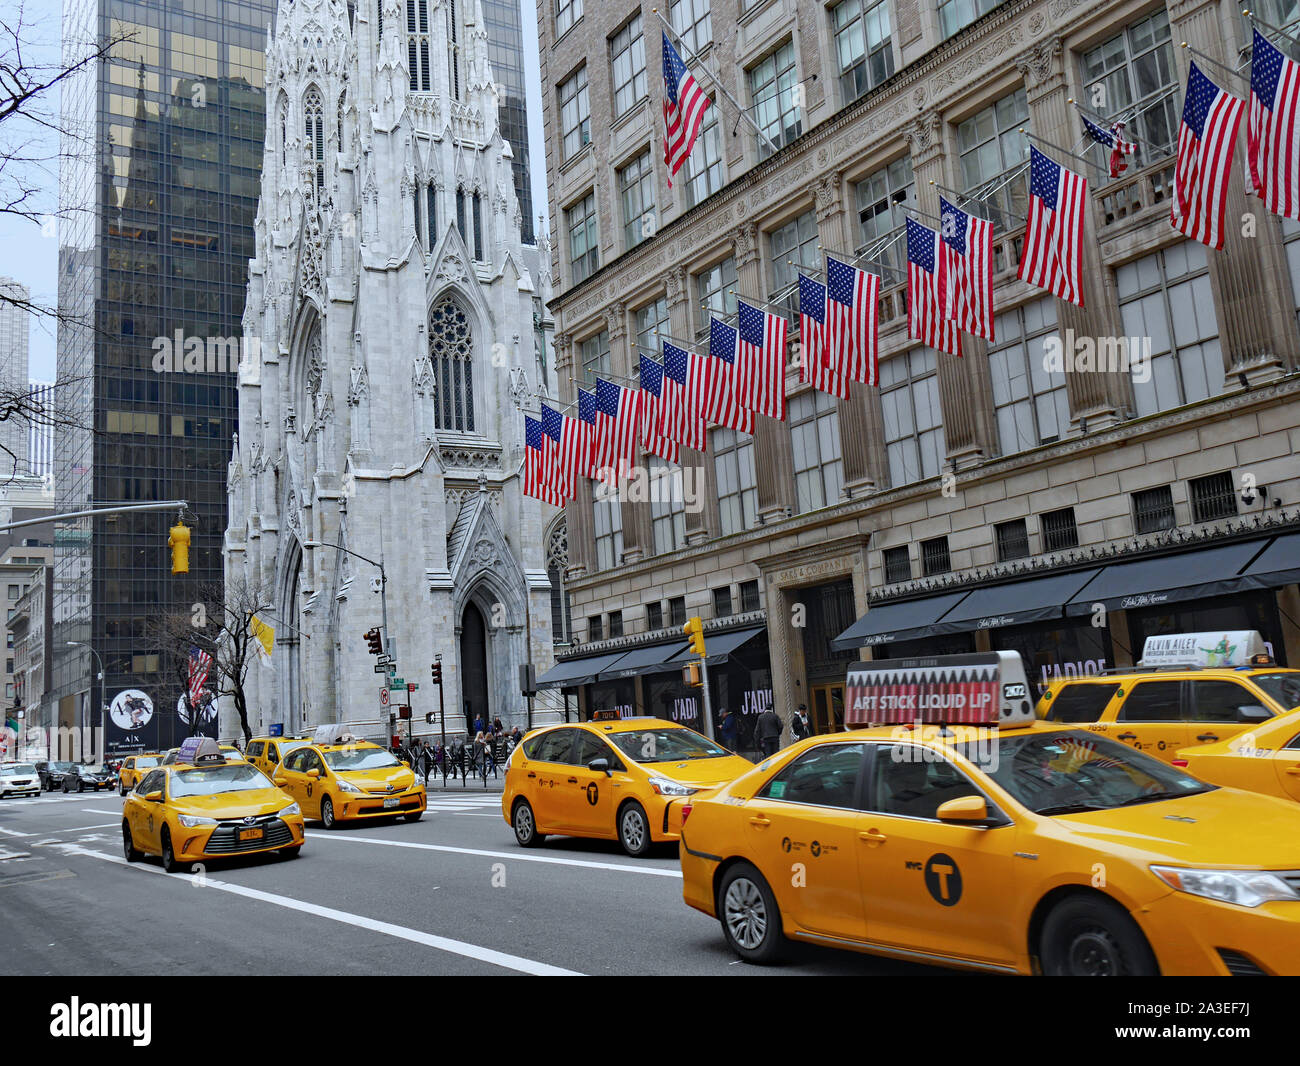 NEW YORK CITY - MARCH 2017:  The huge main store of fashion chain Saks Fifth Avenue is located next to St. Patrick's Cathedral. Stock Photo